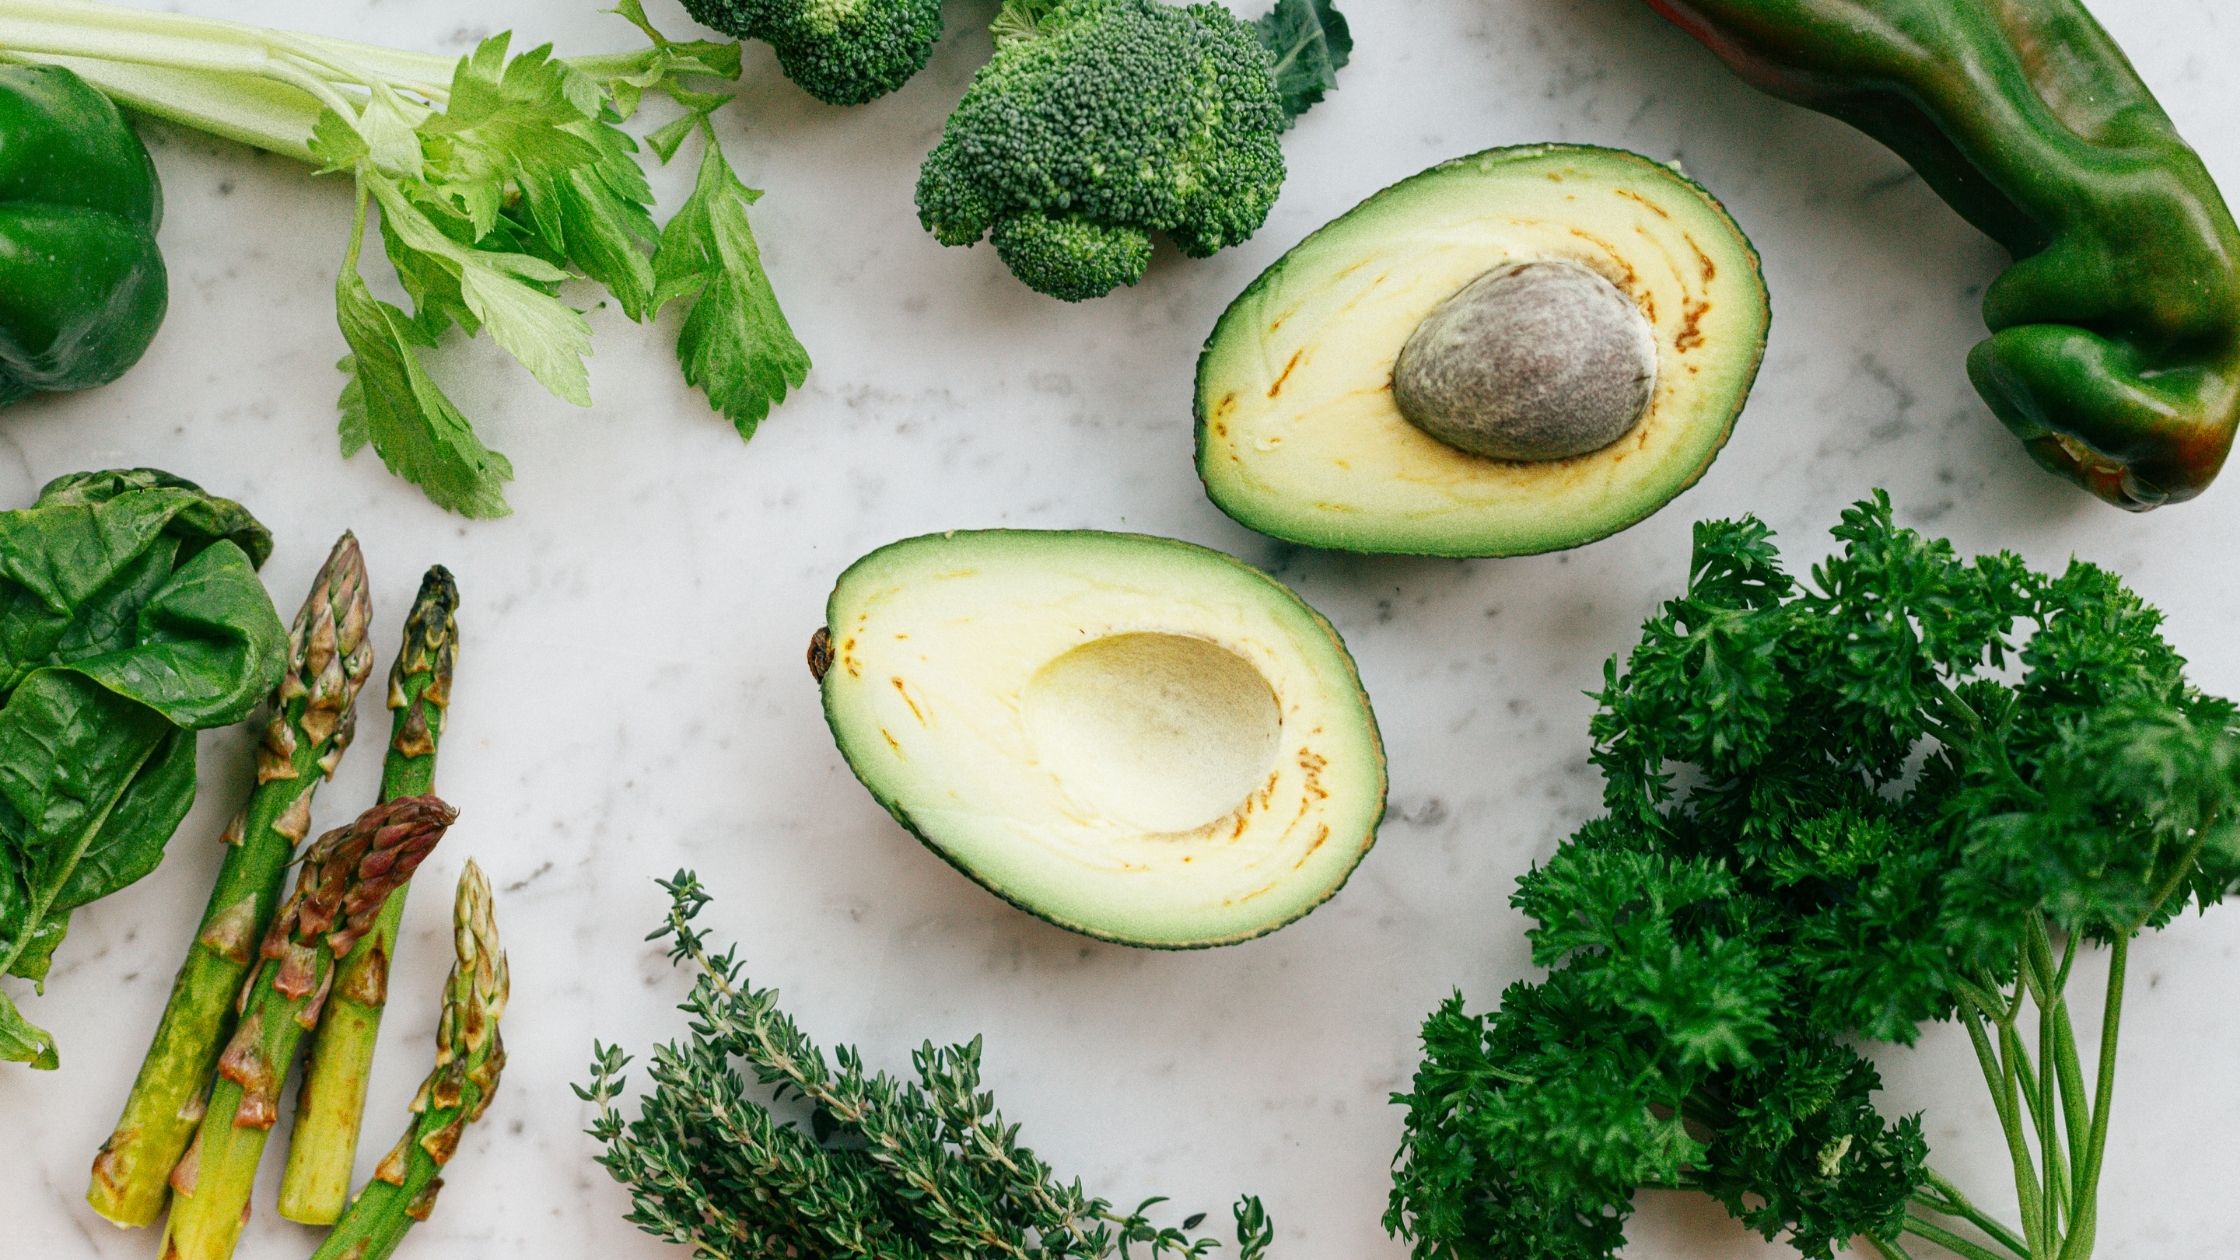 Which vegetables are allowed in the keto diet?